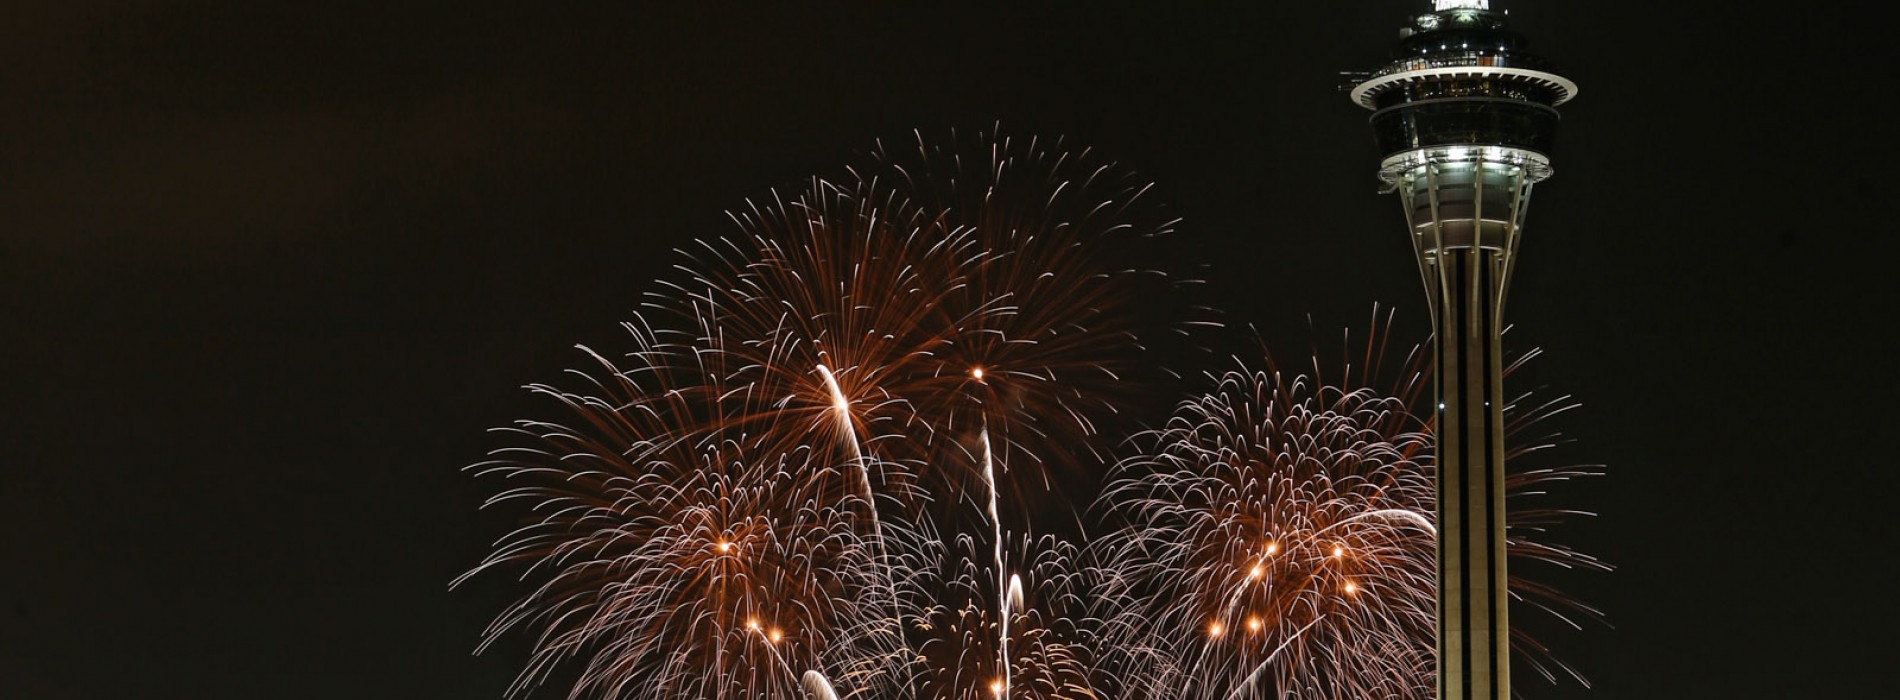 Witness Spectacular Pyrotechnics at this year’s Macau International Fireworks Display